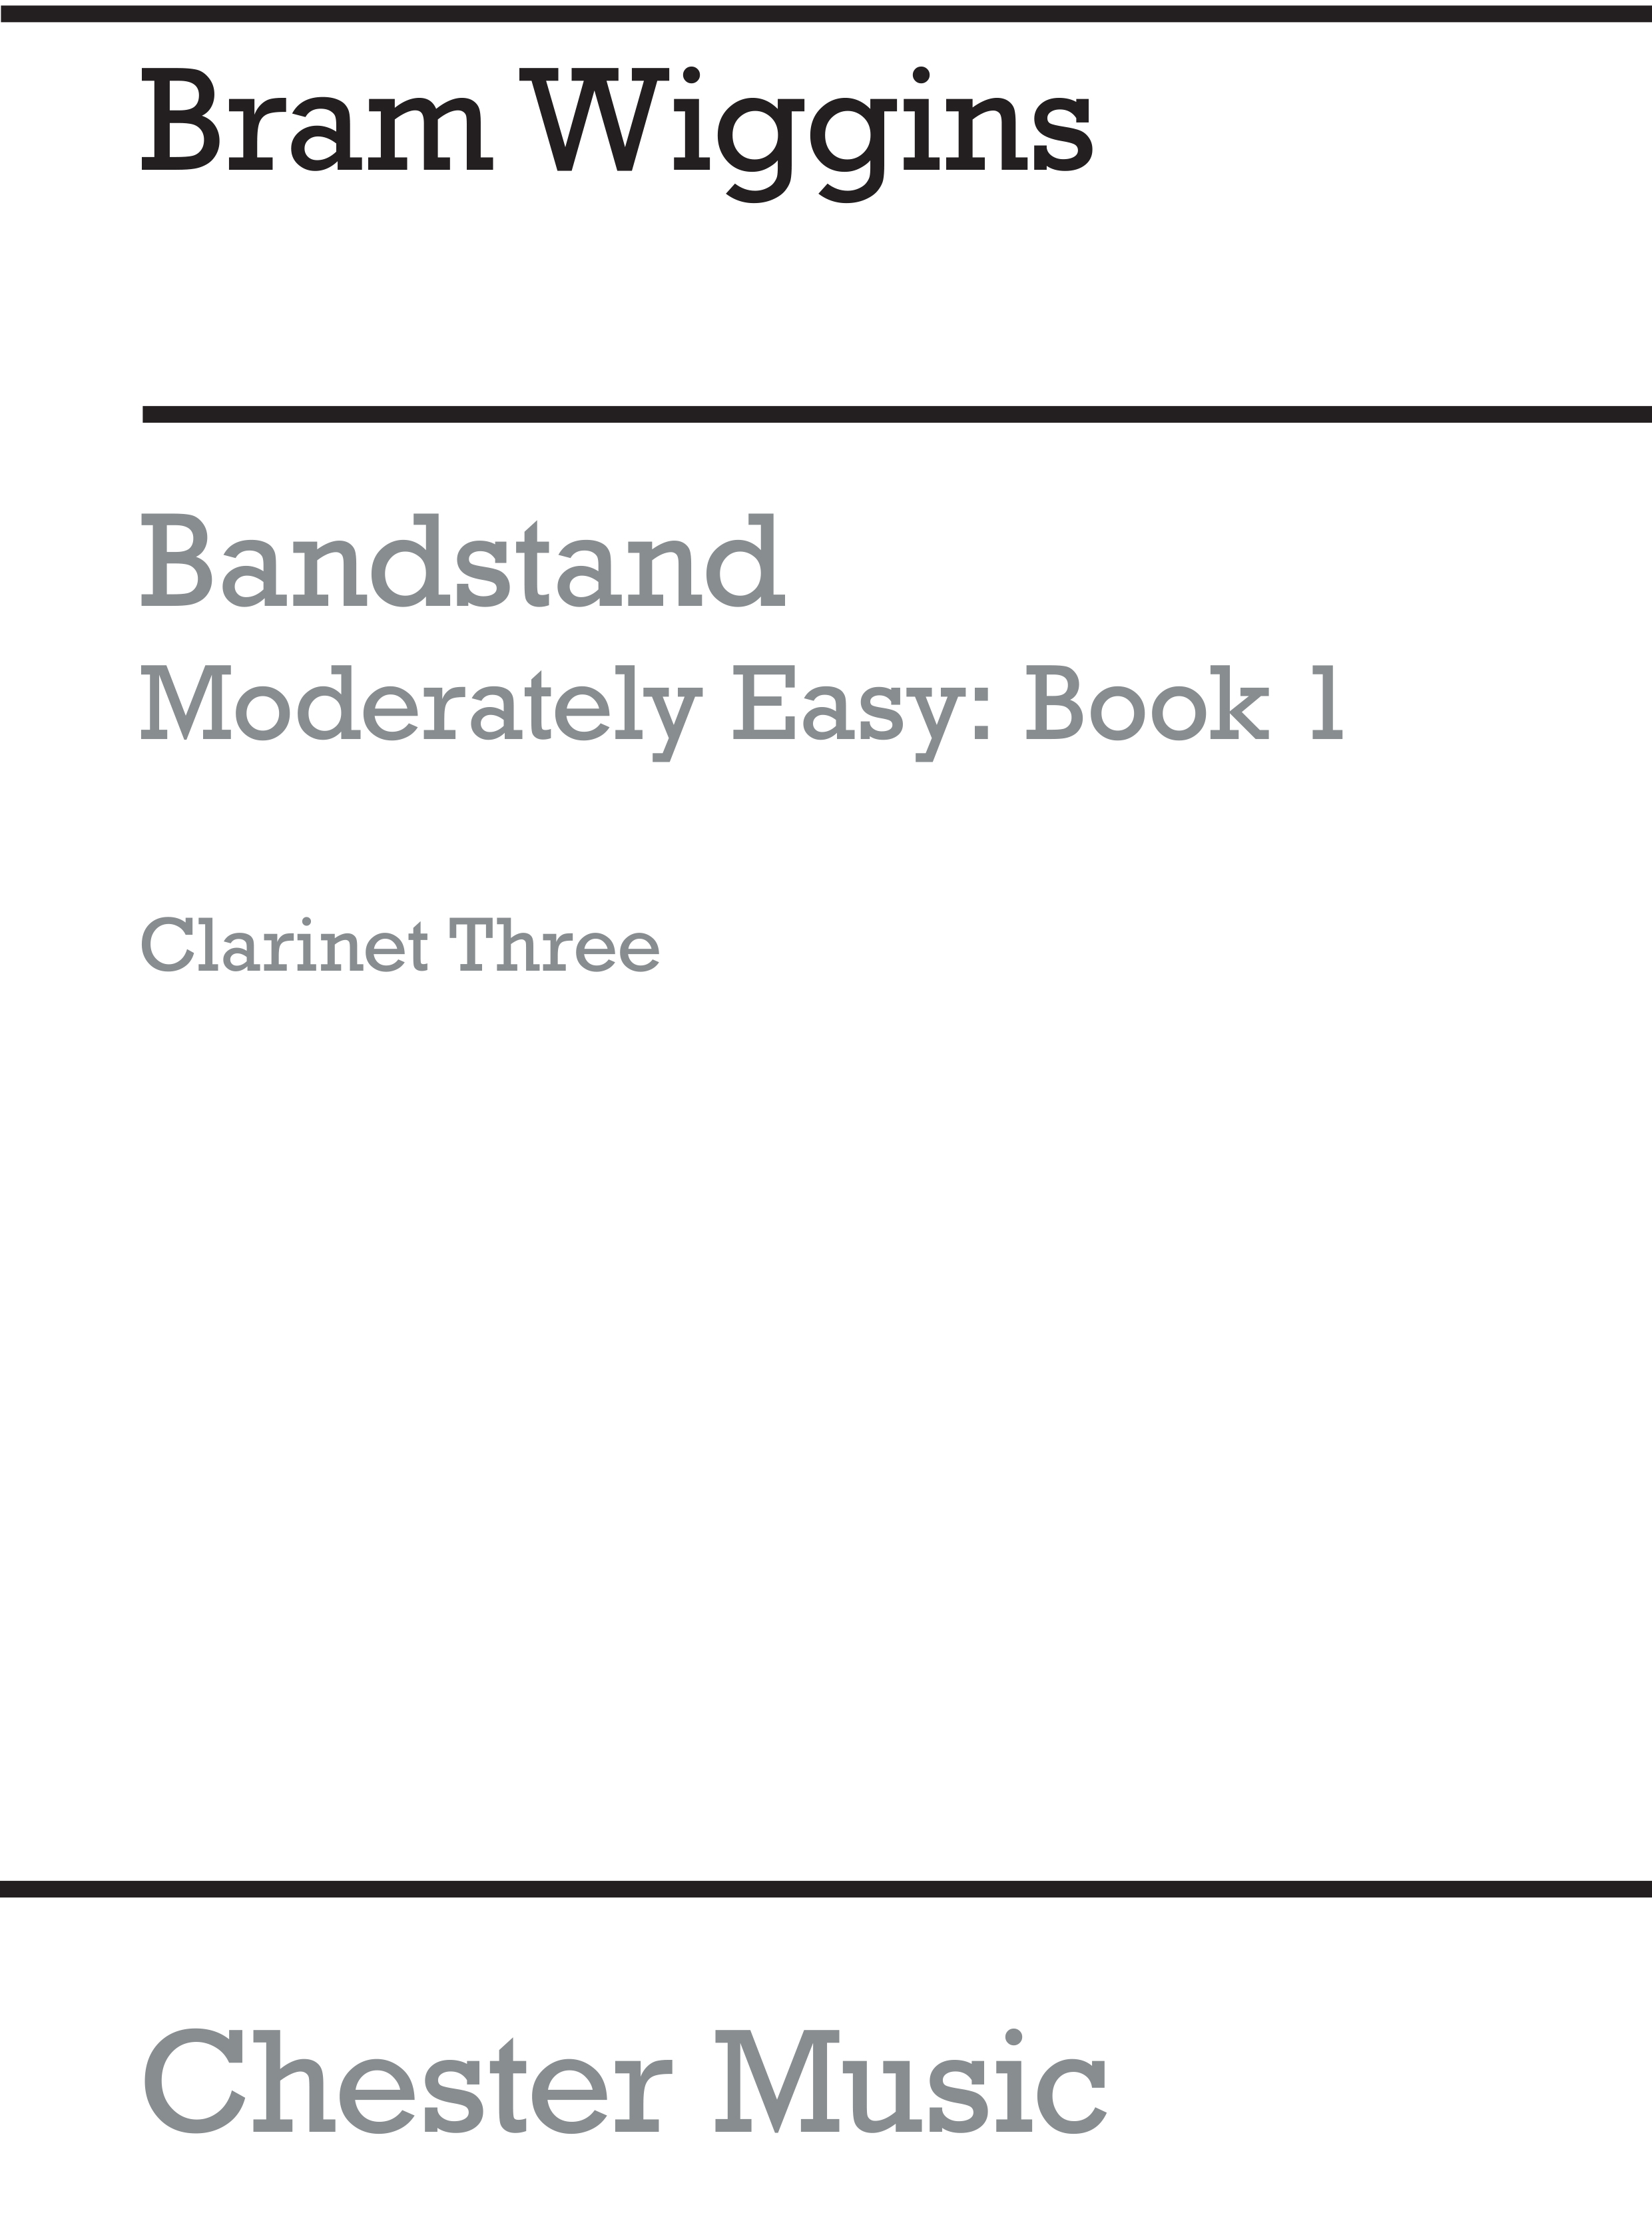 Bram Wiggins: Bandstand Moderately Easy Book 1 (Clarinet 3): Concert Band: Part